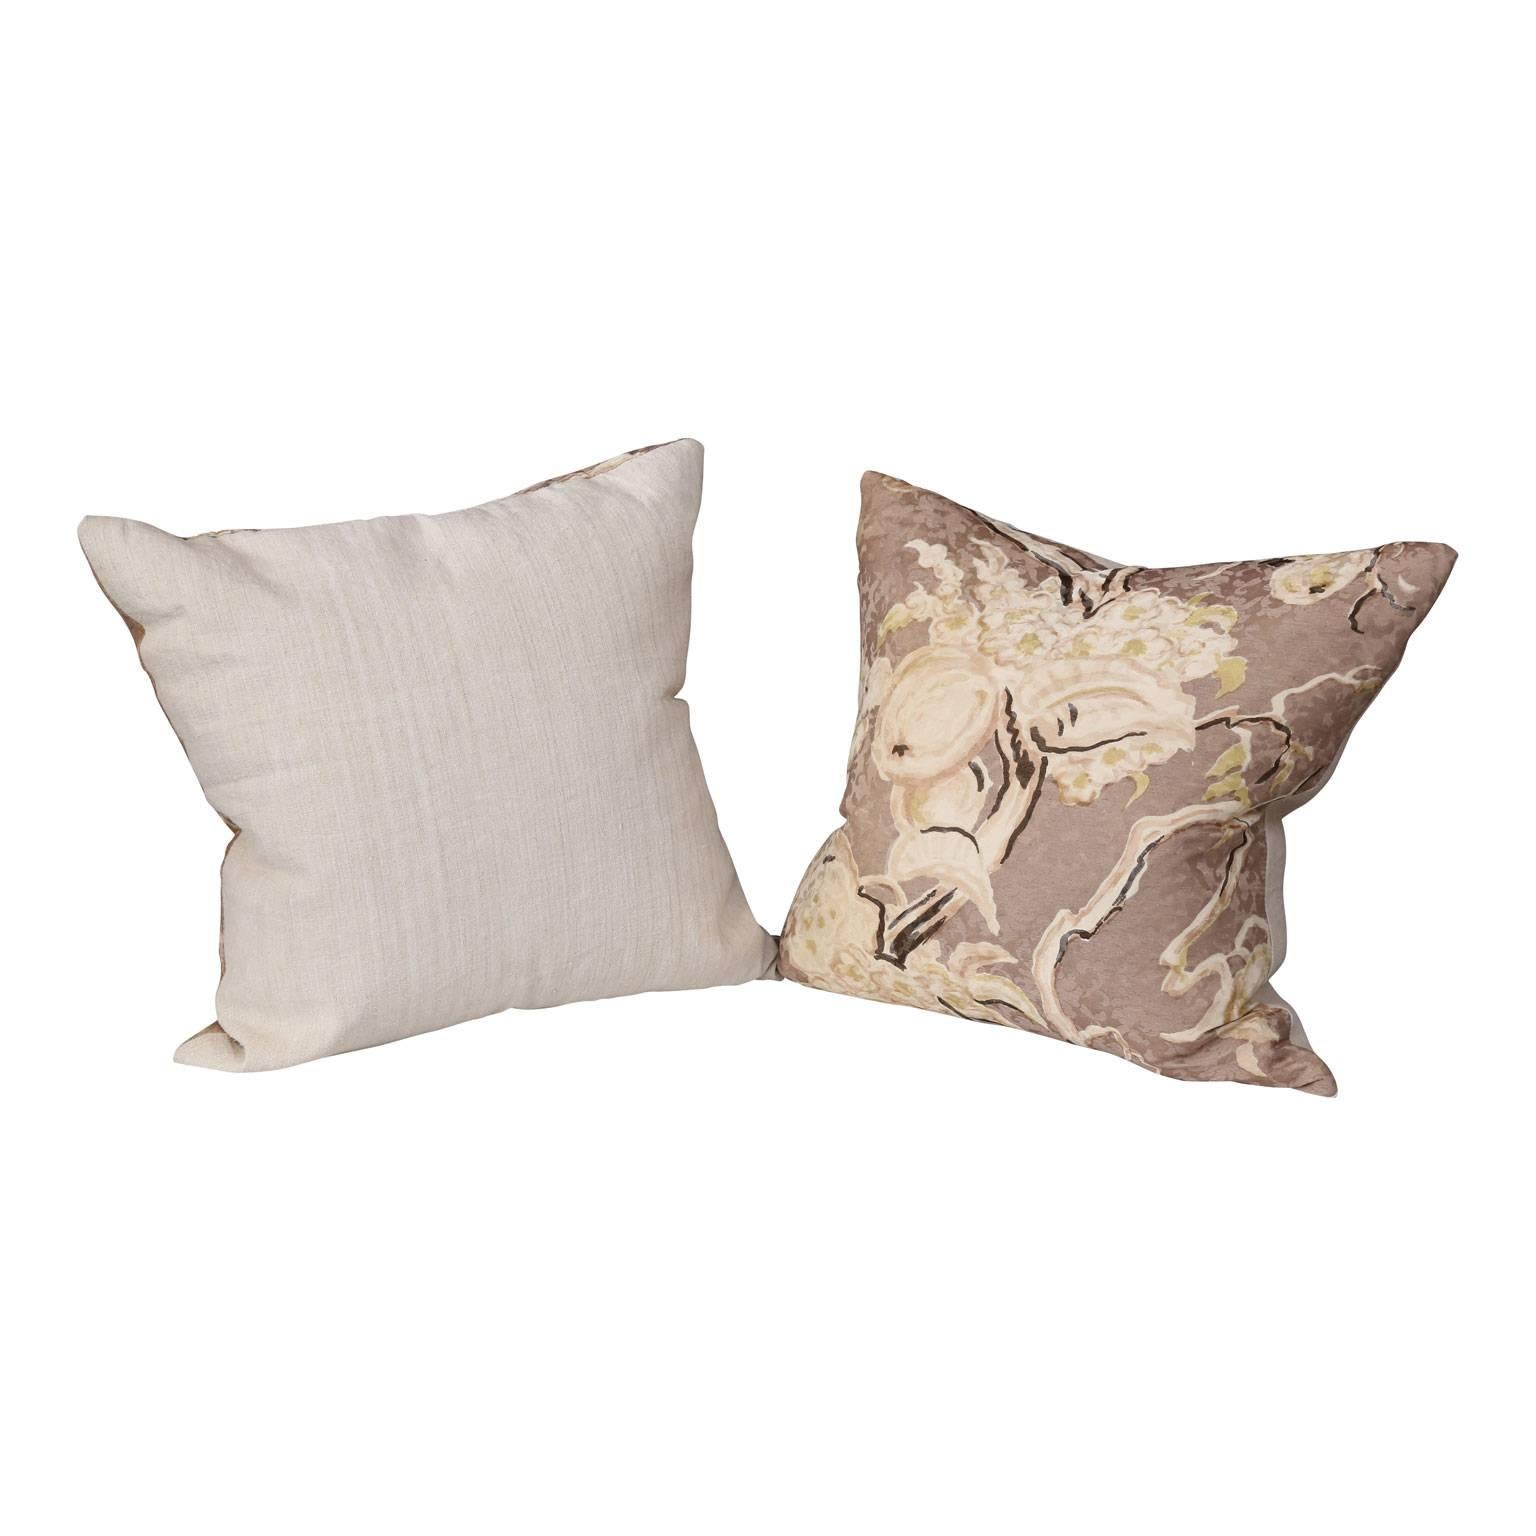 Pair of vintage silk cushions: hand-painted silk damask pillows with linen and silk blend backs (circa 1950-1970). Sides of pillows measure 22 inches when pulled taut.